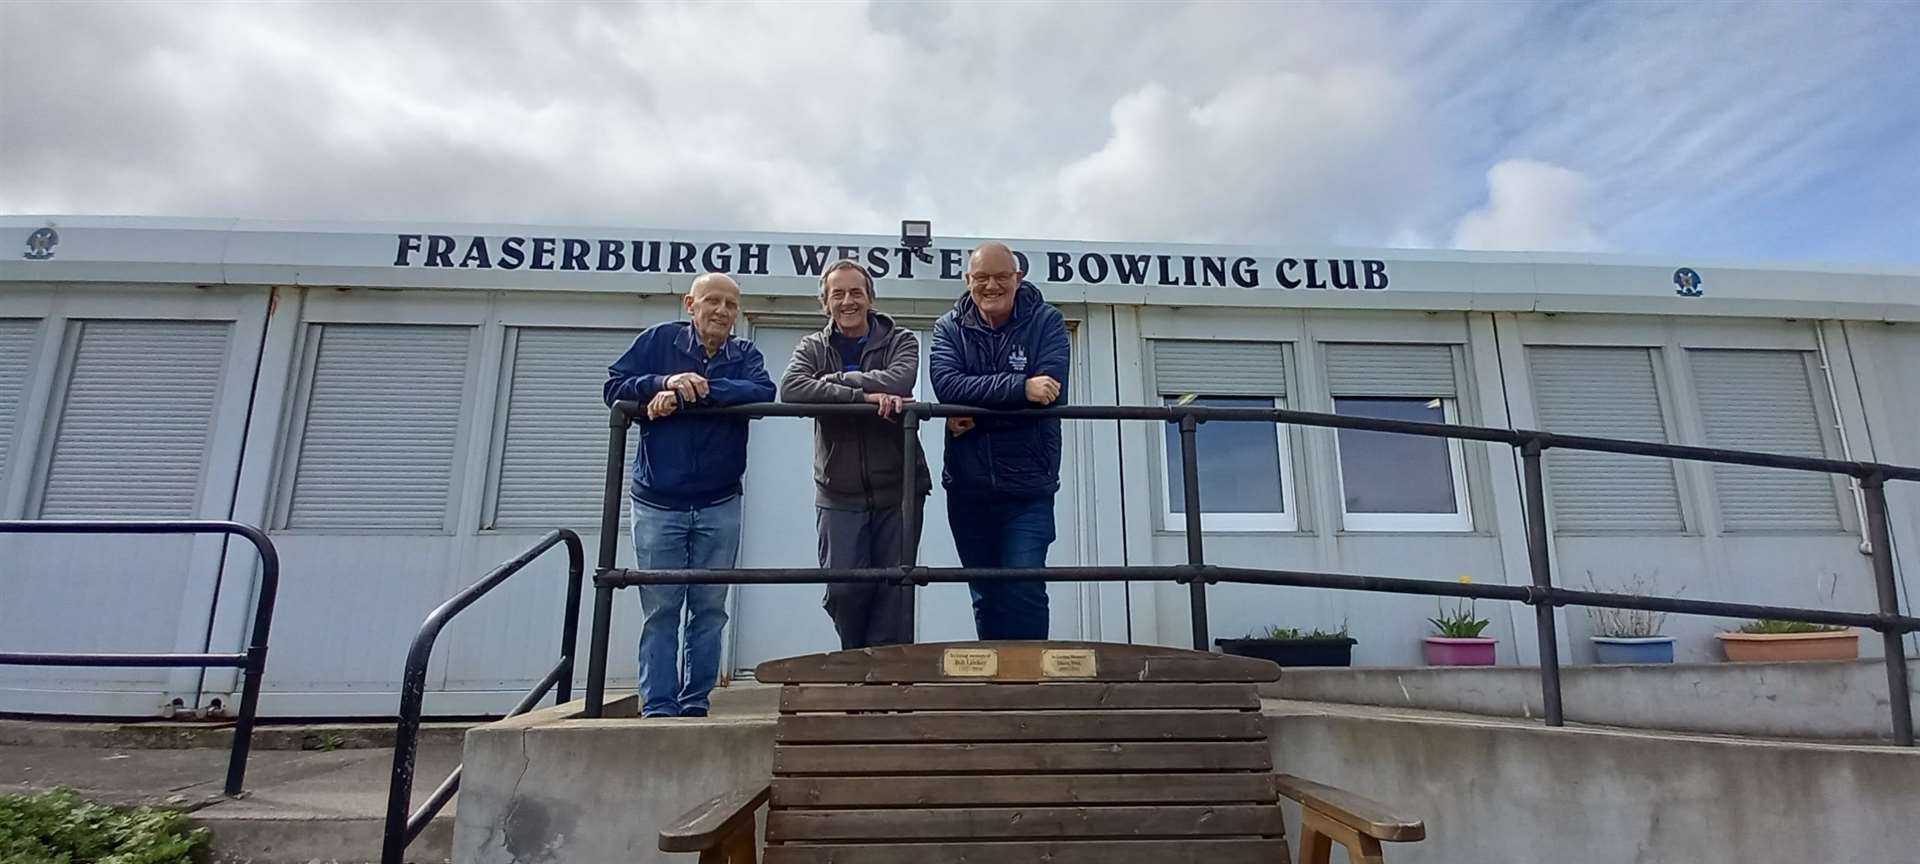 Fraserburgh West Bowling Club members John Bryce, Jonathan Griffiths and Graham Duthie outside the clubhouse